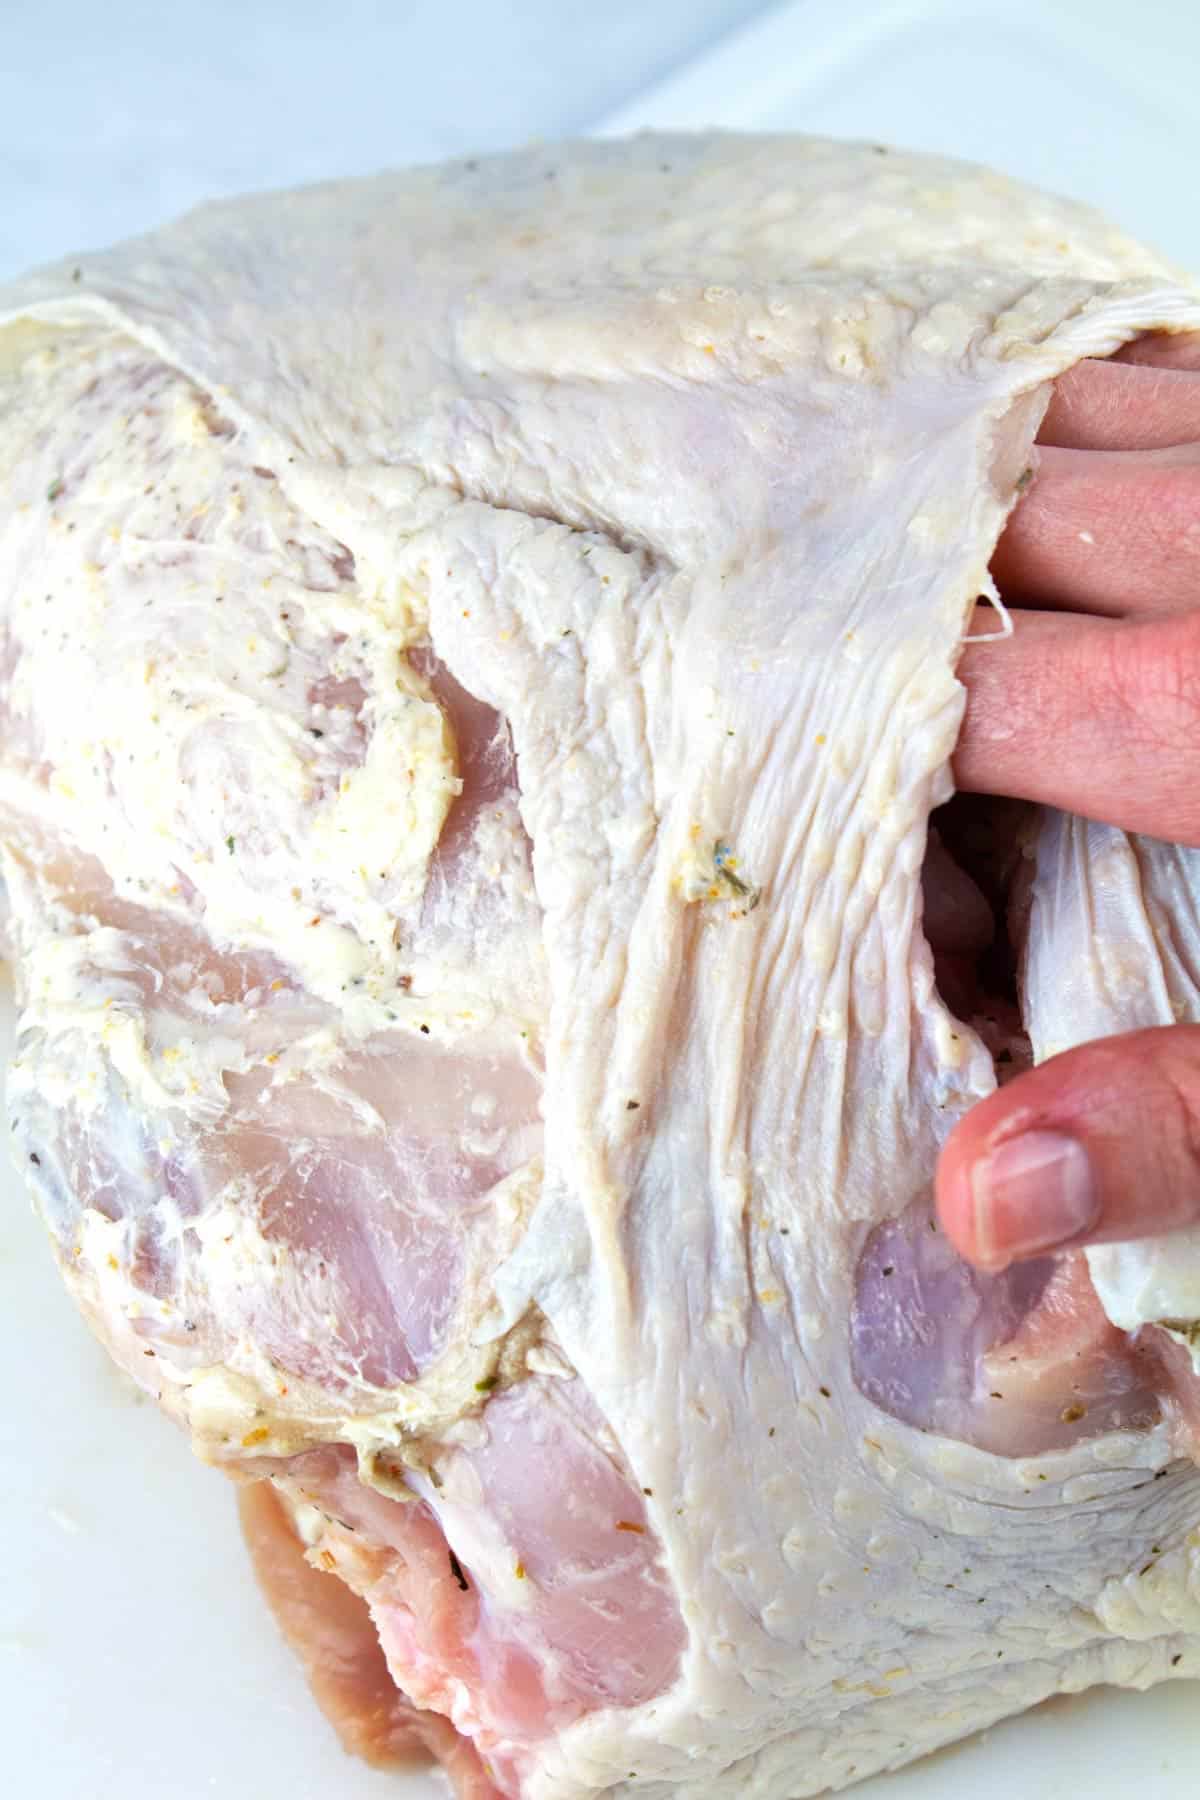 Hand rubbing flavored butter under the skin of the turkey breast.